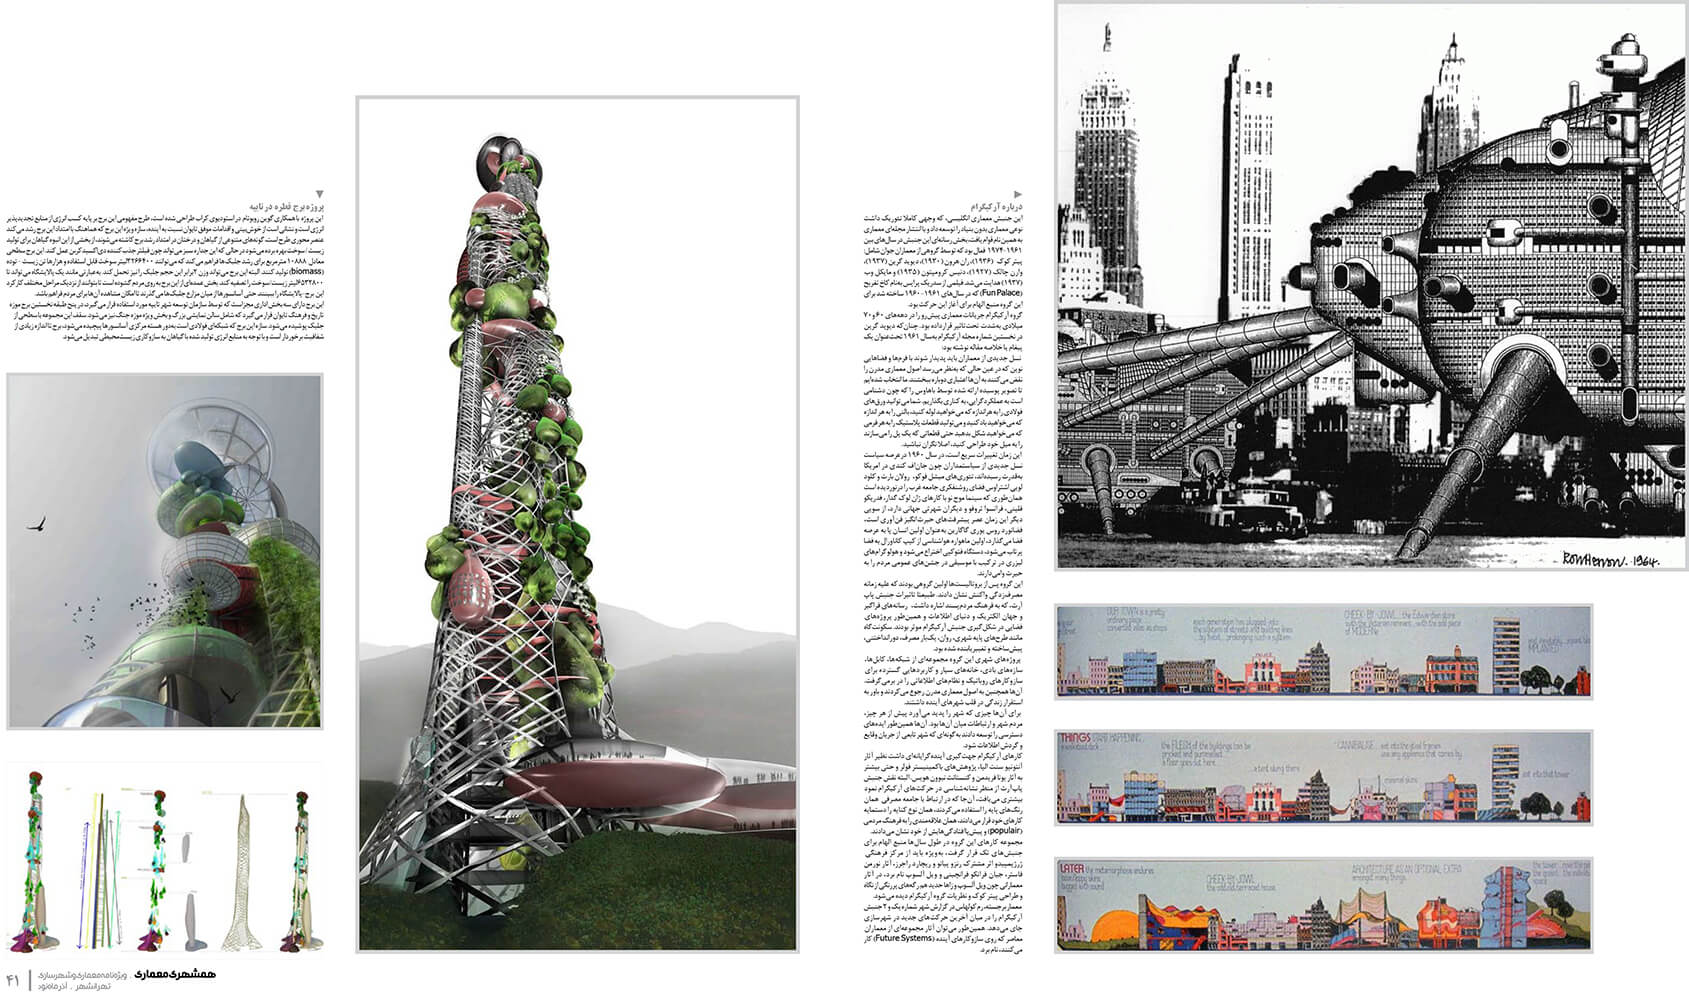 picture no. 4 of publication: Playful Fun and Architecture, author: Kambiz Moshtaq